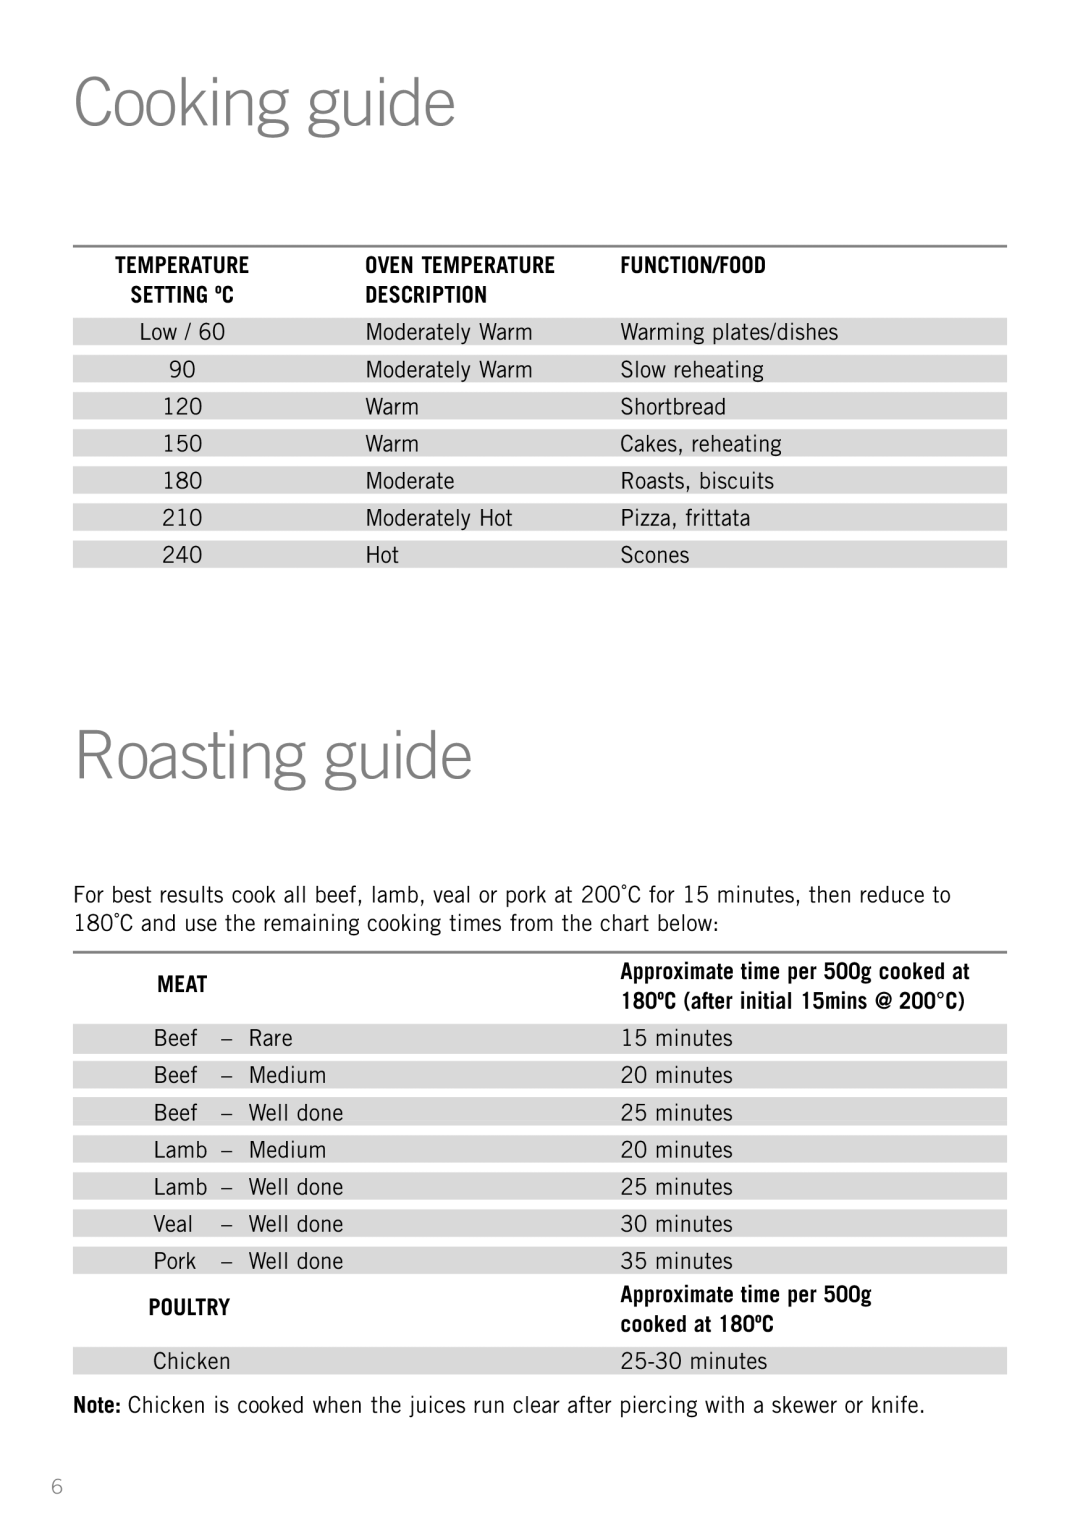 Sunbeam BT2600 manual Cooking guide, Roasting guide, Oven Temperature, Function/Food, Description, Meat, cooked at 180ºC 